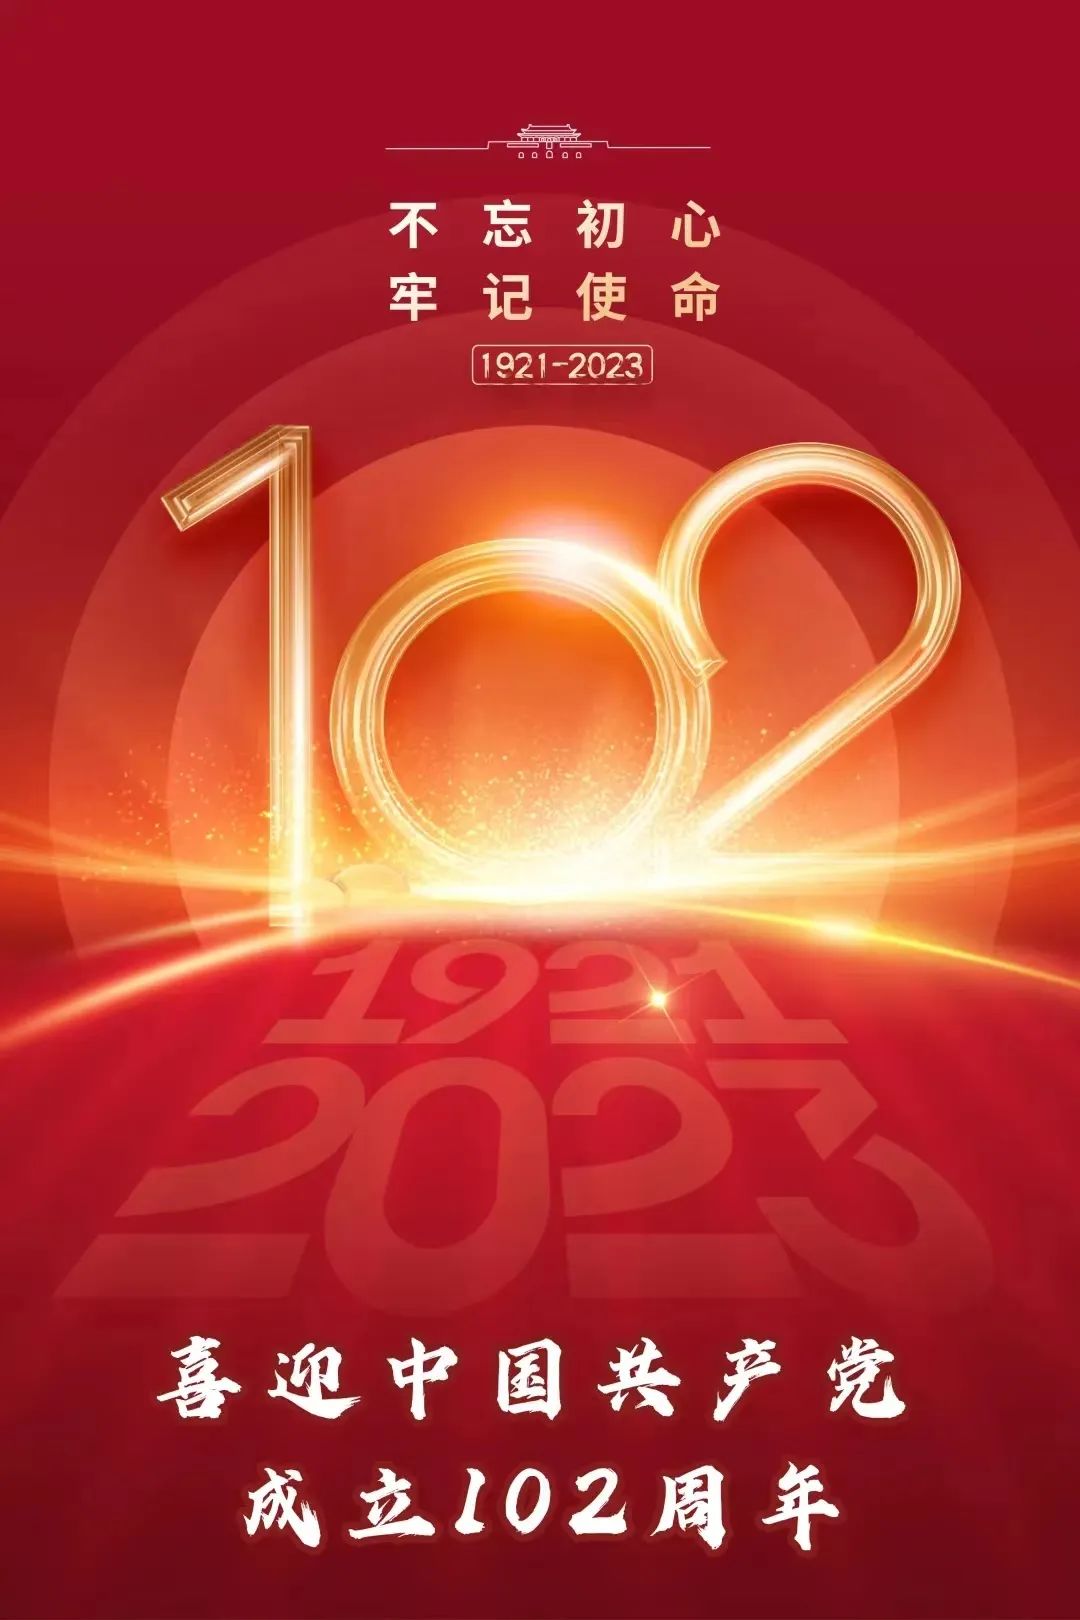 Jinyan Party Construction | celebrated the 102nd anniversary of the founding of the party 